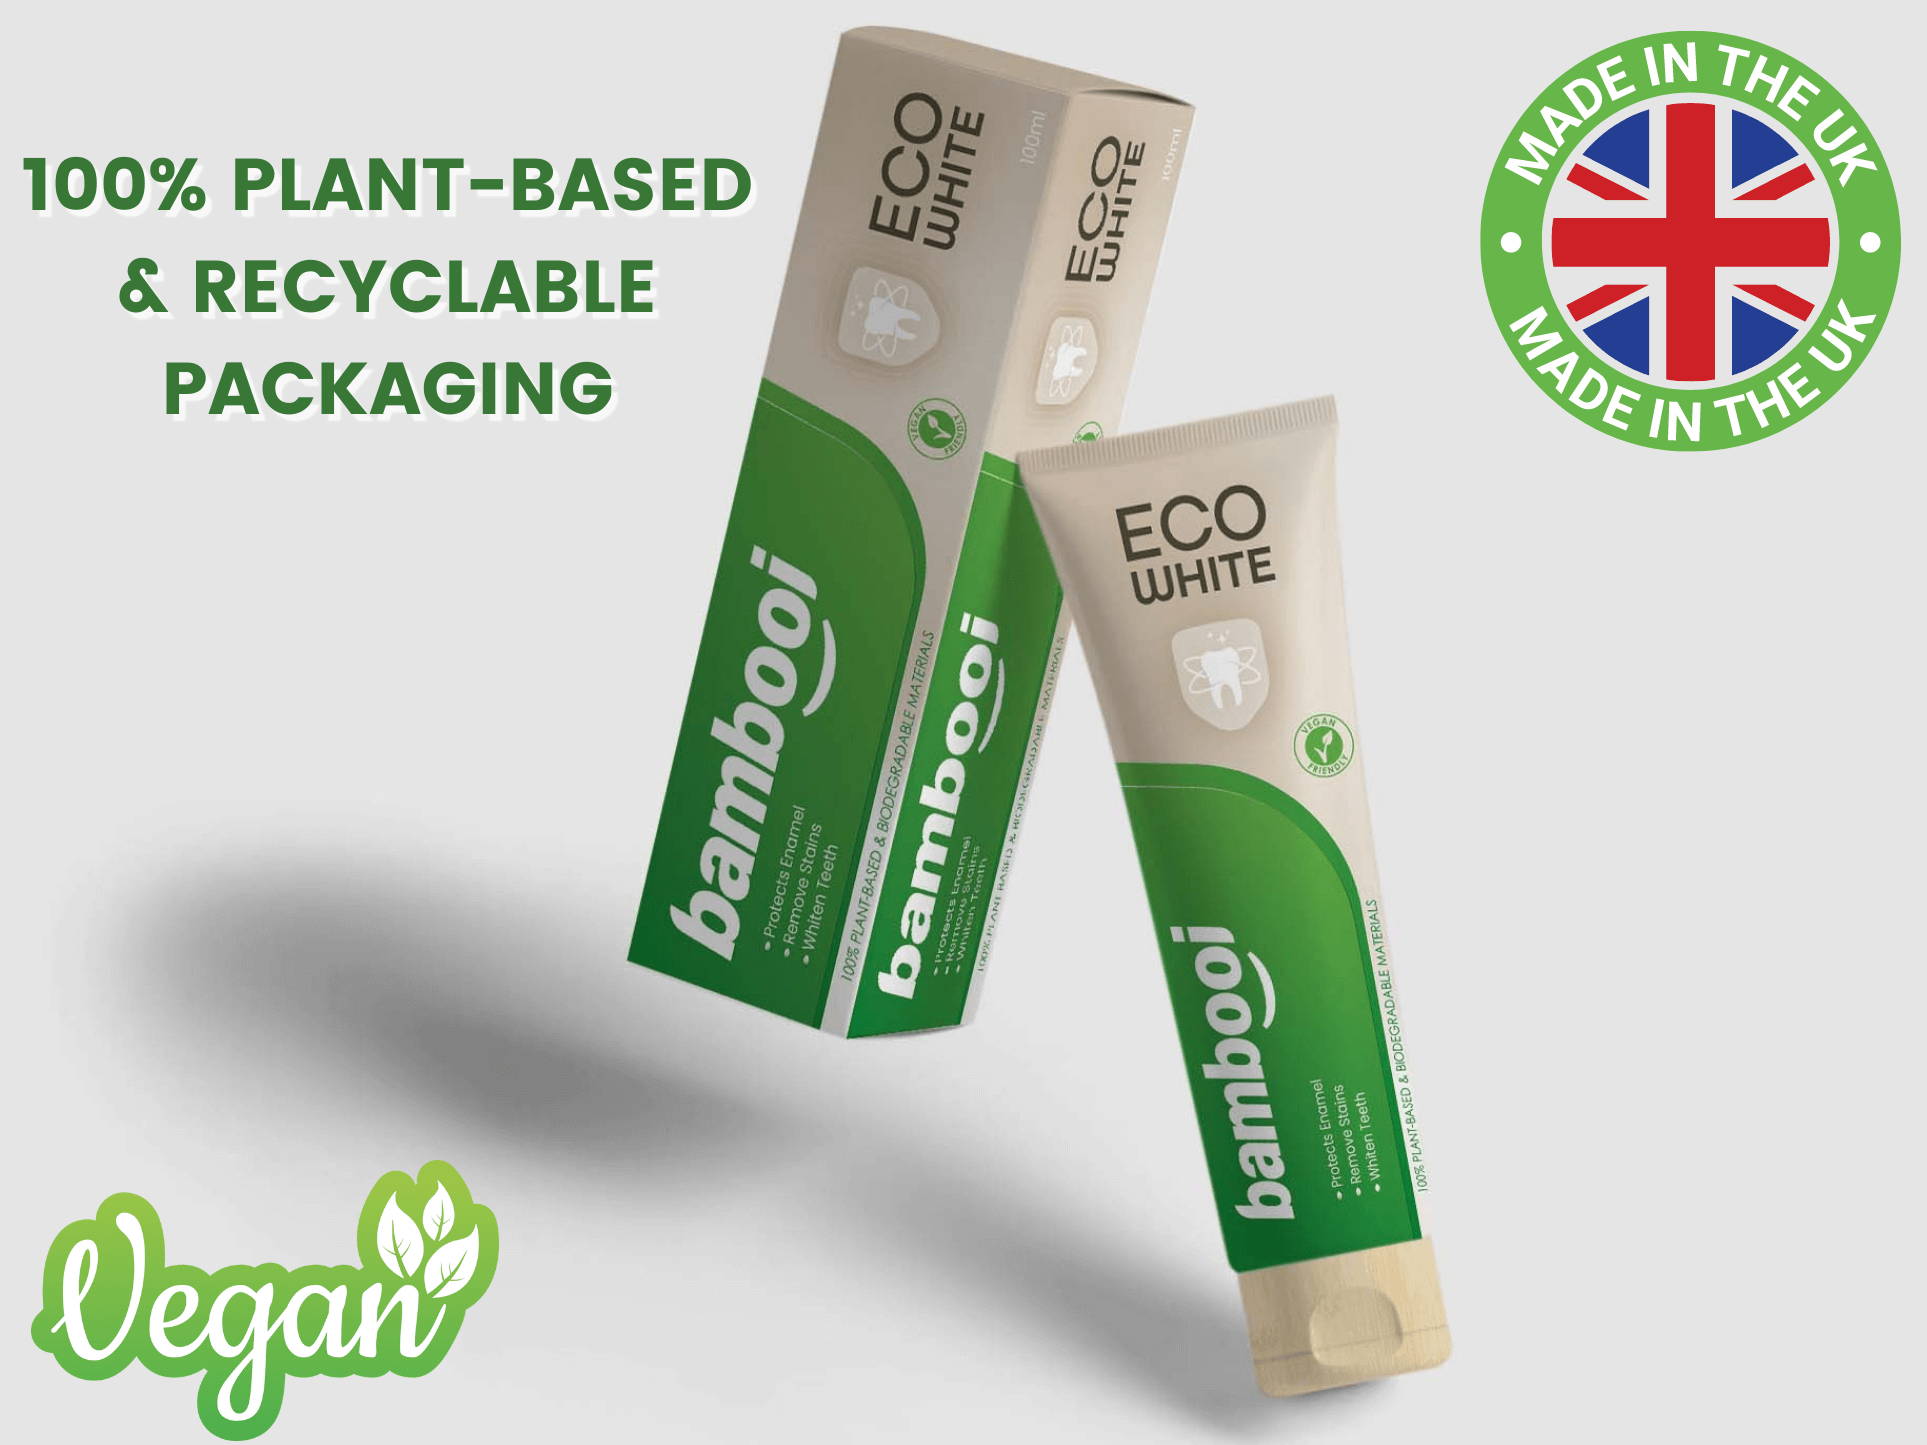 Introducing Eco White™ - The Eco Friendly Toothpaste